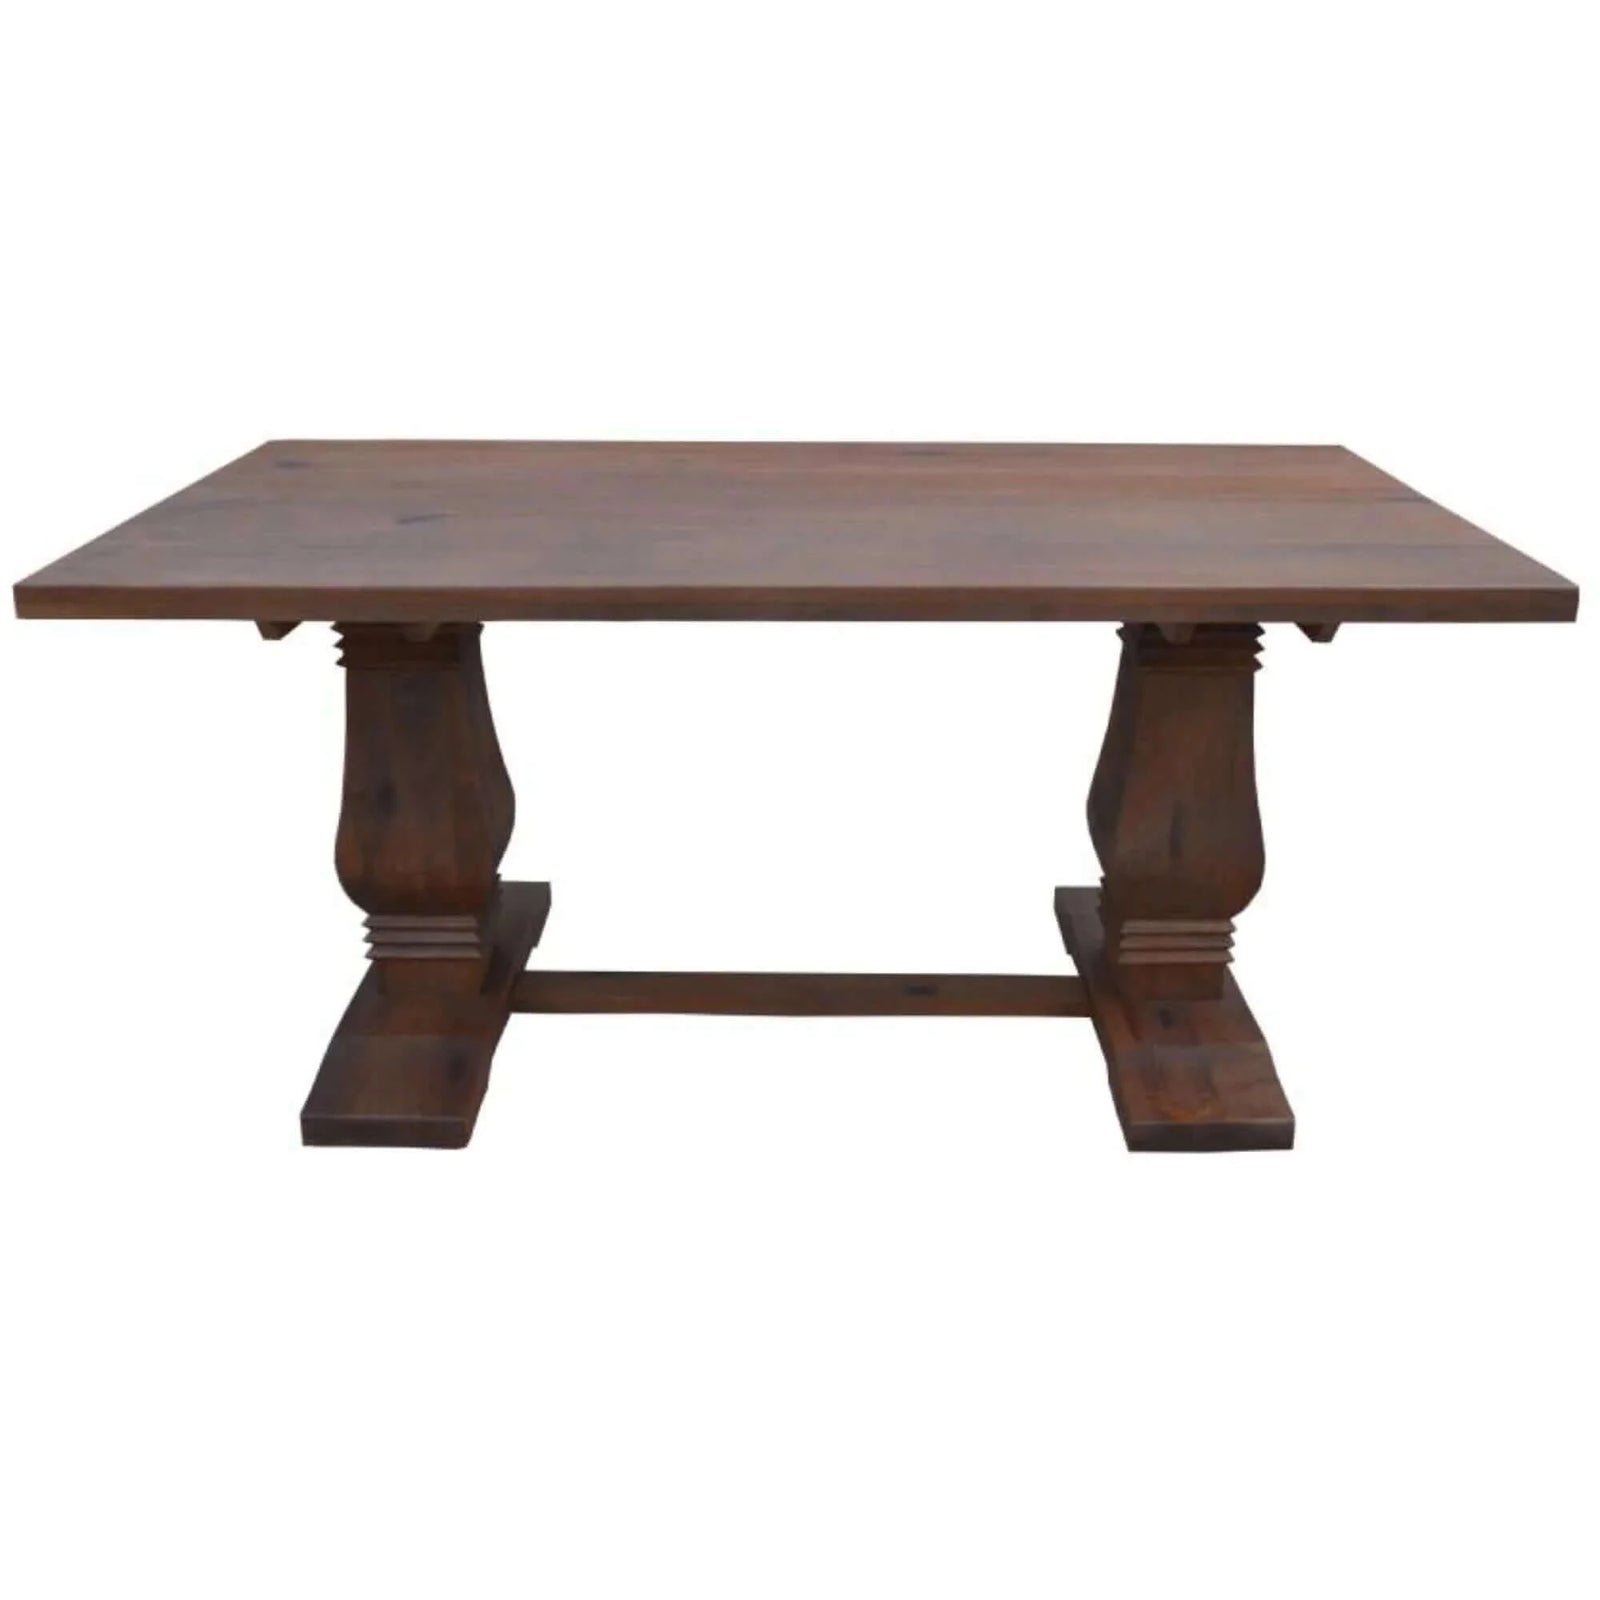 Buy florence high dining table 200cm french provincial pedestal solid timber wood - upinteriors-Upinteriors